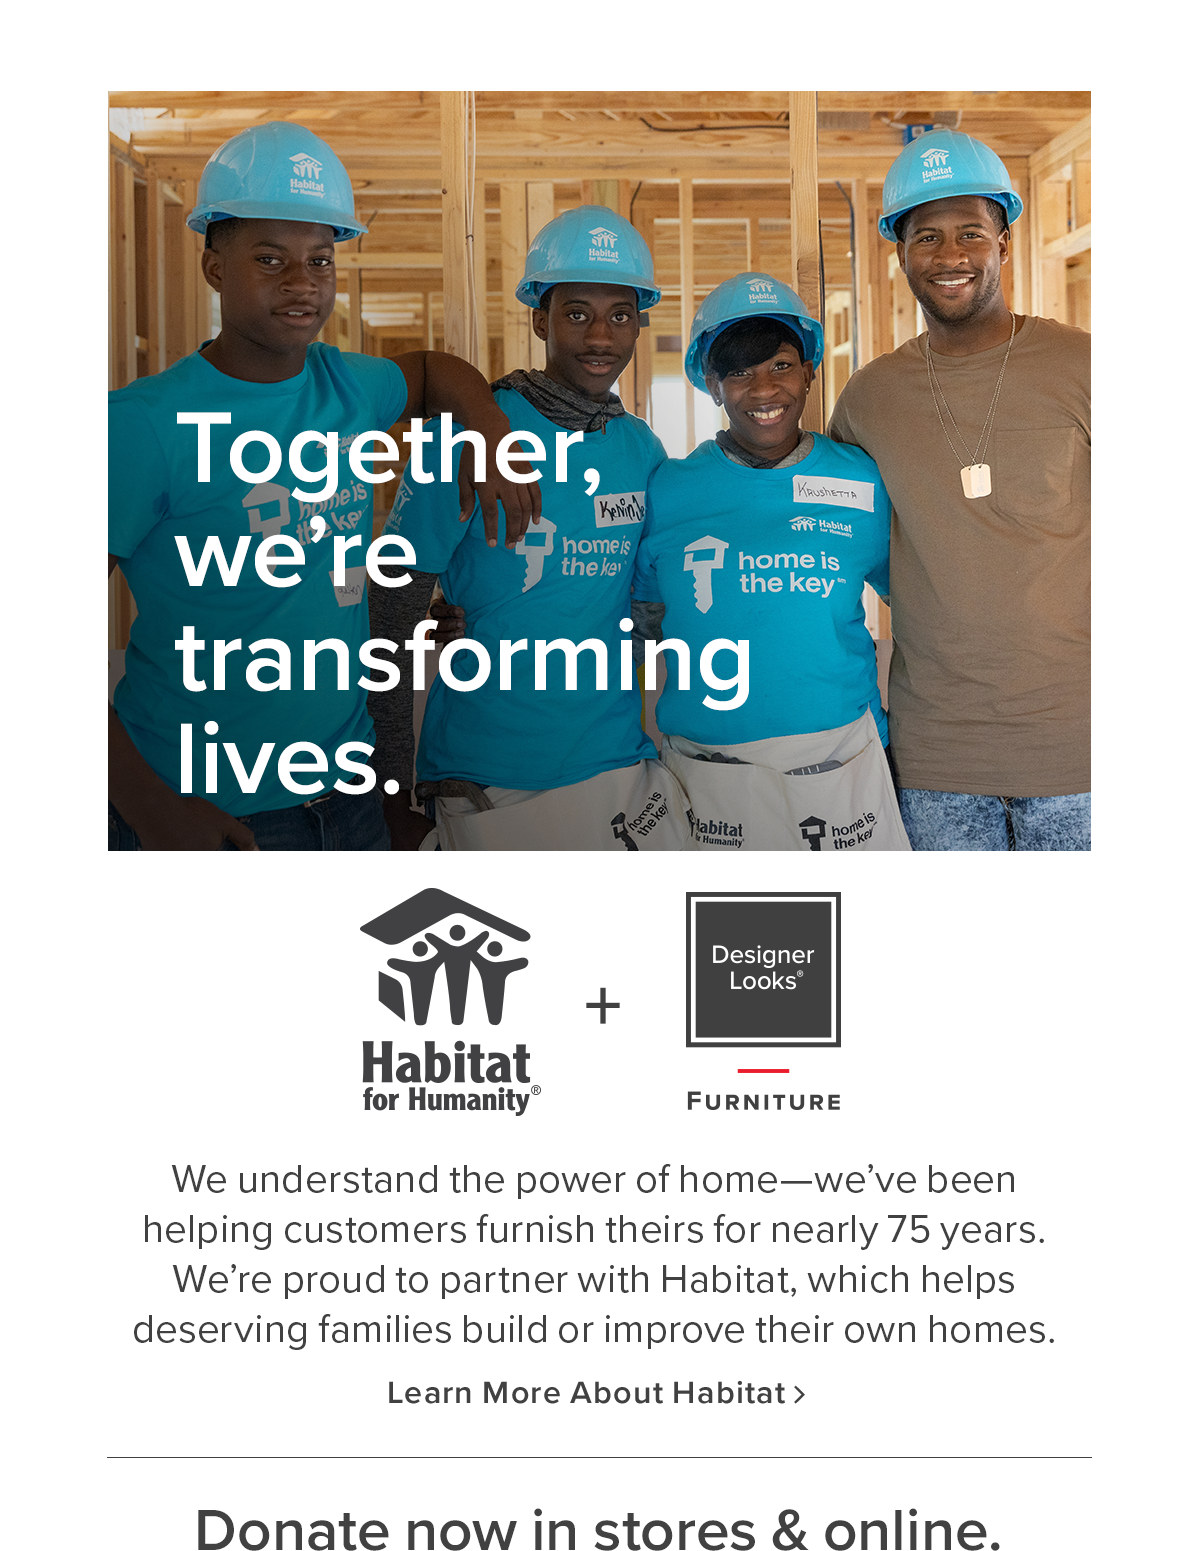 Together, we're transforming lives. | Learn more about Habitat for Humanity